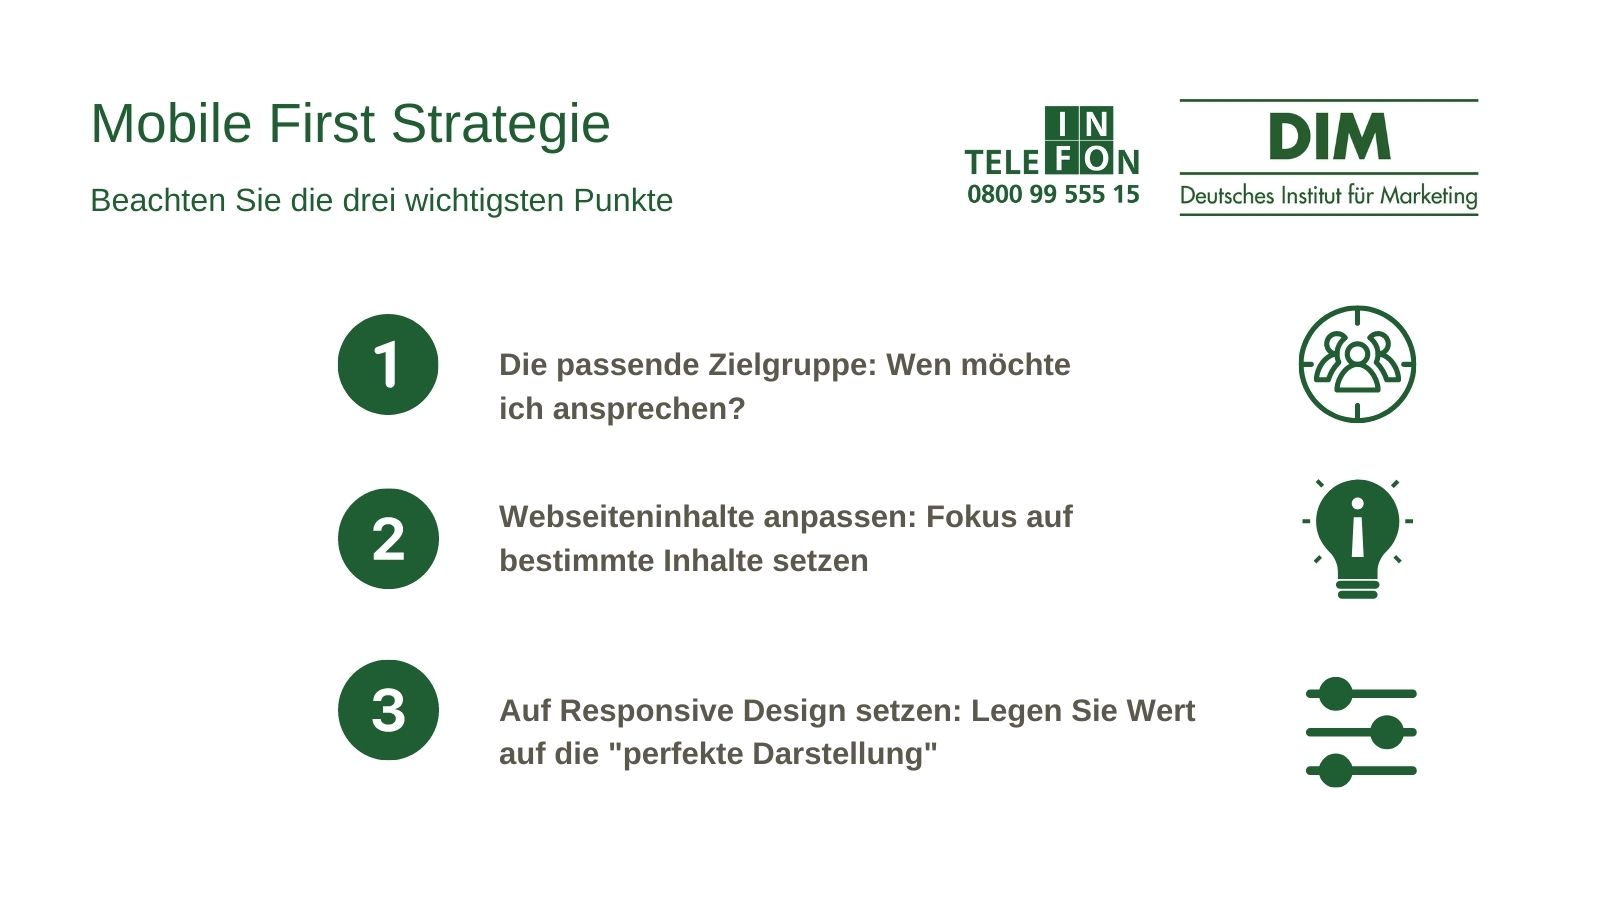 Mobile First Strategie